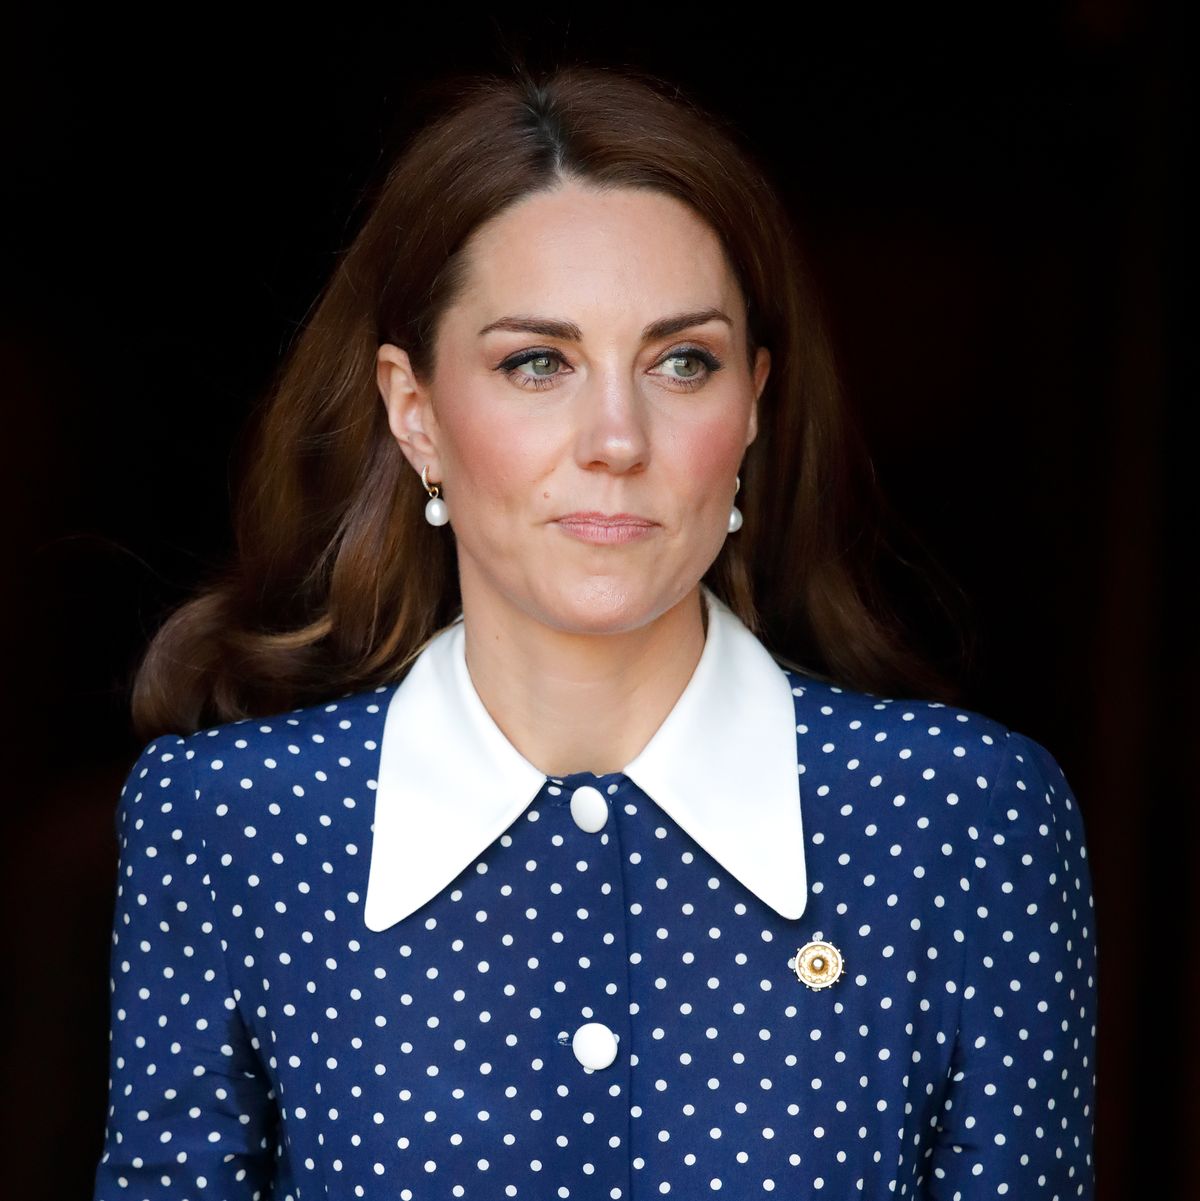 TikTok Thinks Kate Middleton Is Sending a Clear Message With Her